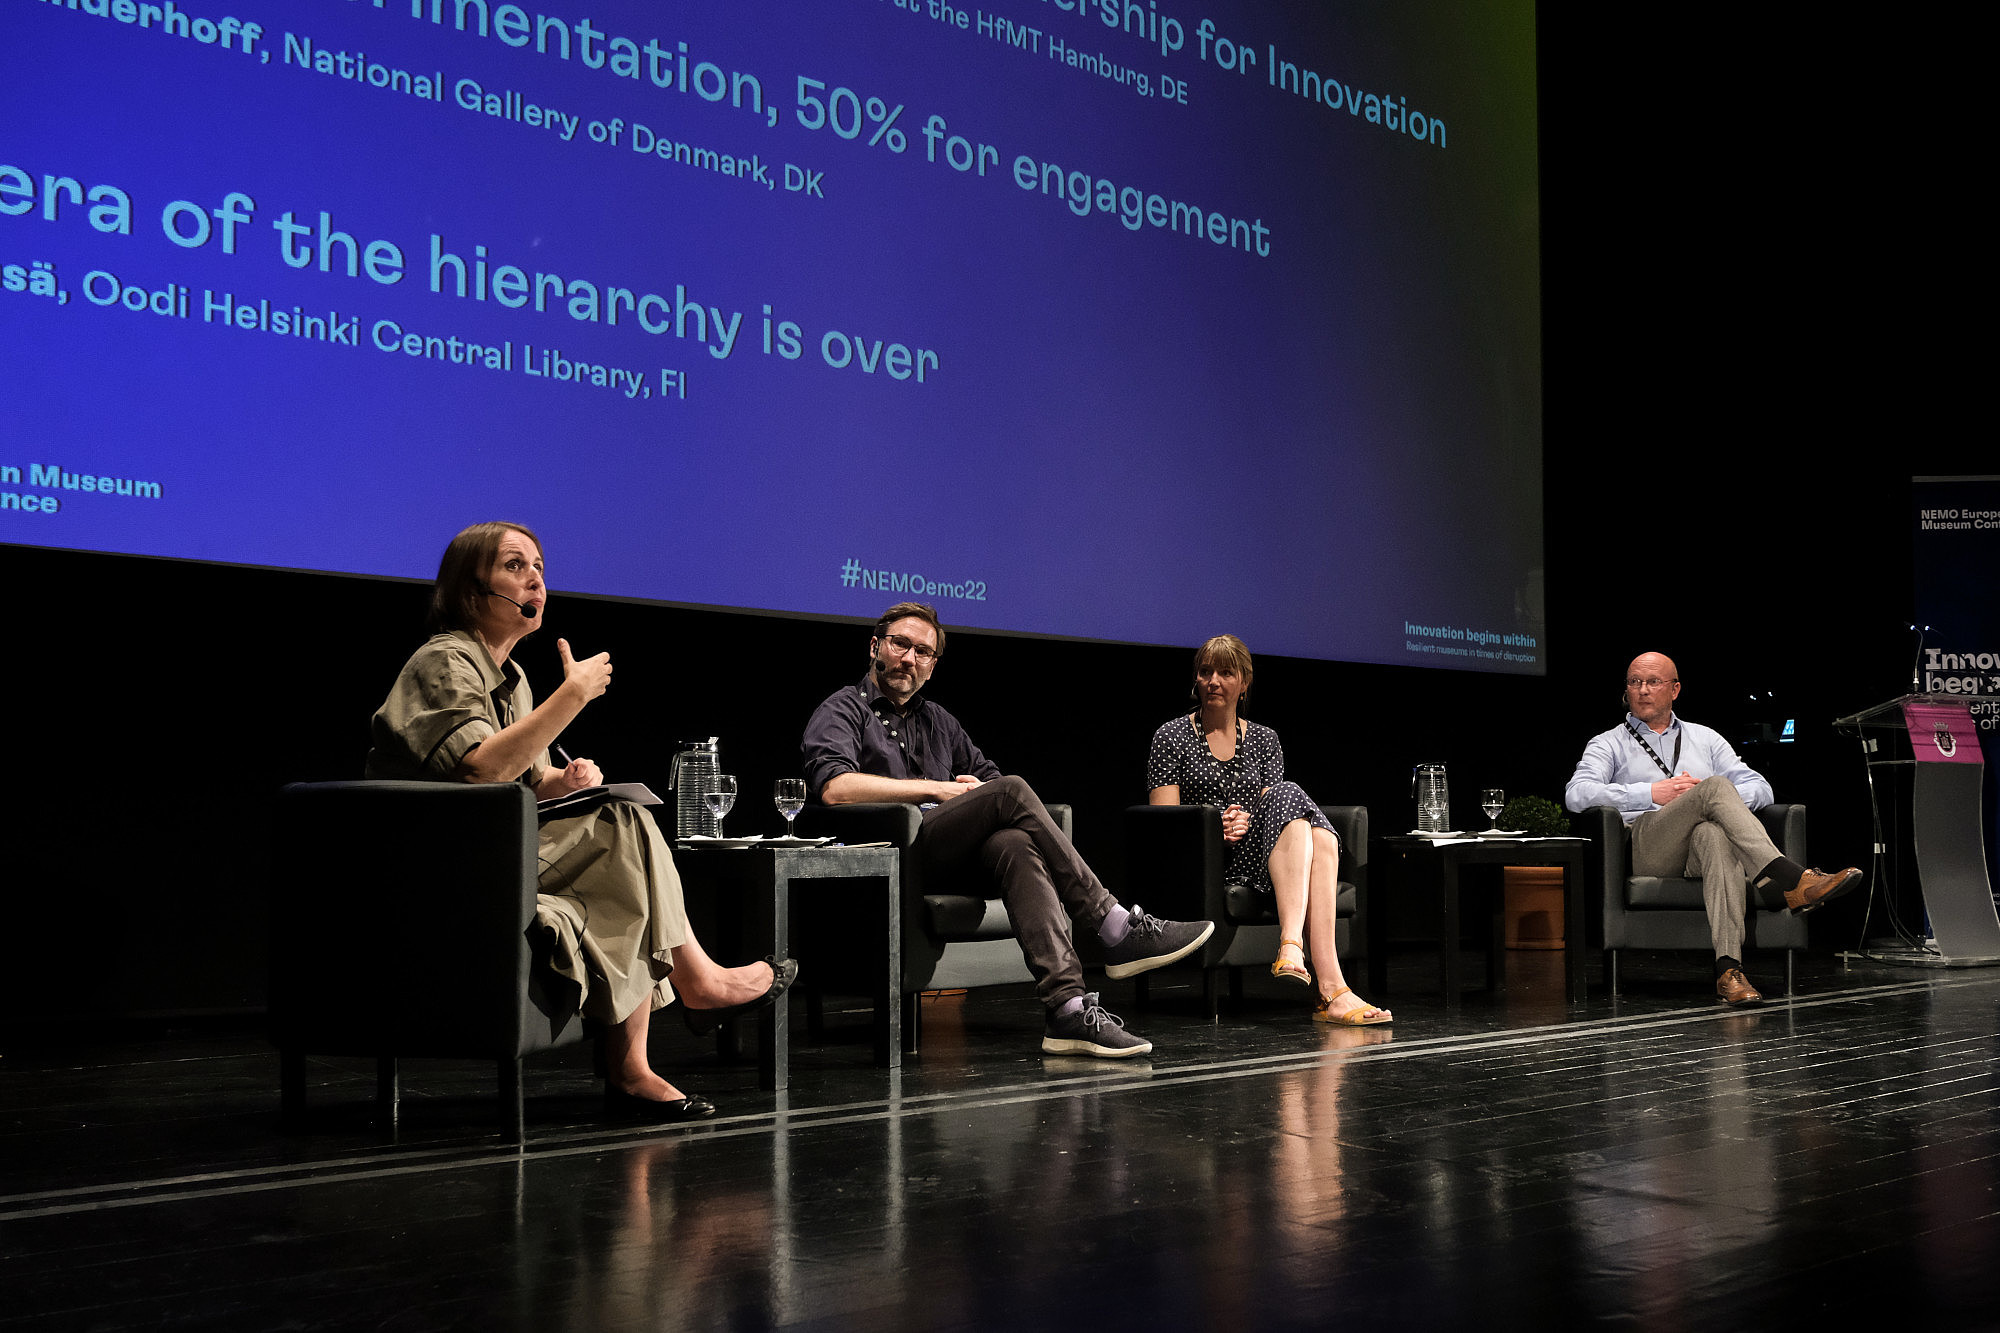 Four people are sitting on a stage. One person is talking, the others are looking at them.In the background, presentation slides are projected to a screen.   © Image: Jorge Gomes